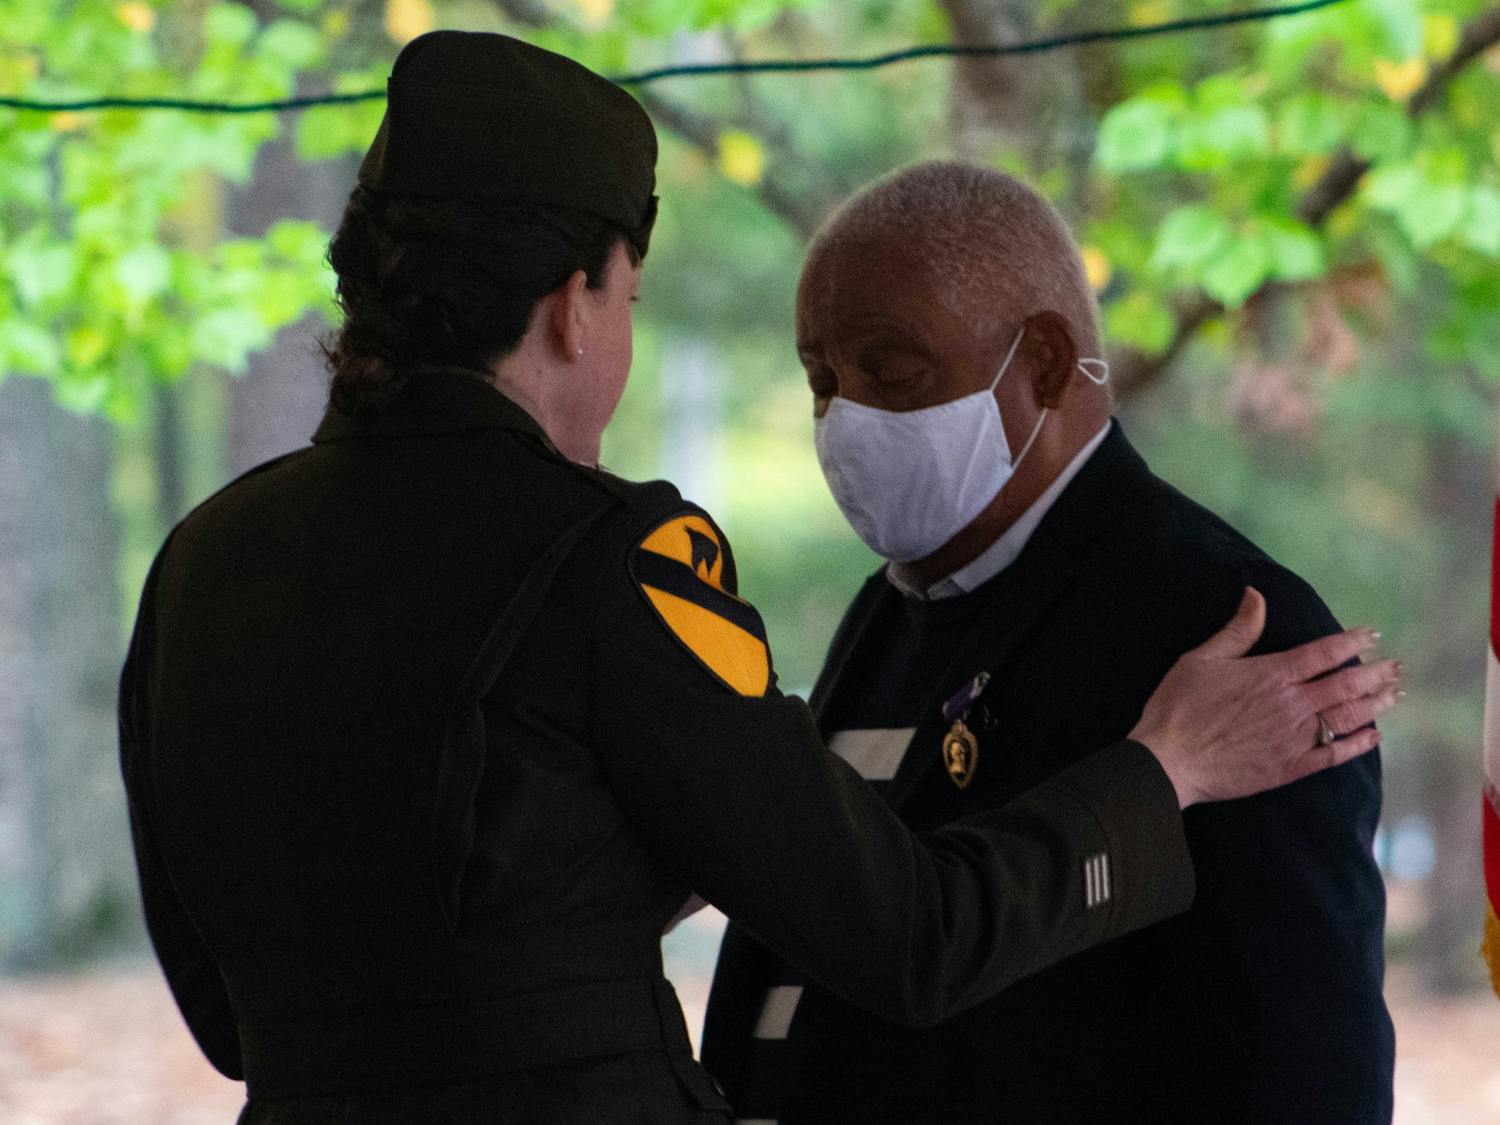 Army Brigadier General Alison C. Martin presents the Purple Heart to Vietnam War veteran John Spencer 51 years after his service, on Nov. 4. Spencer was denied the Purple Heart and other medals until the Military and Veterans Law Clinic at UNC took his case.